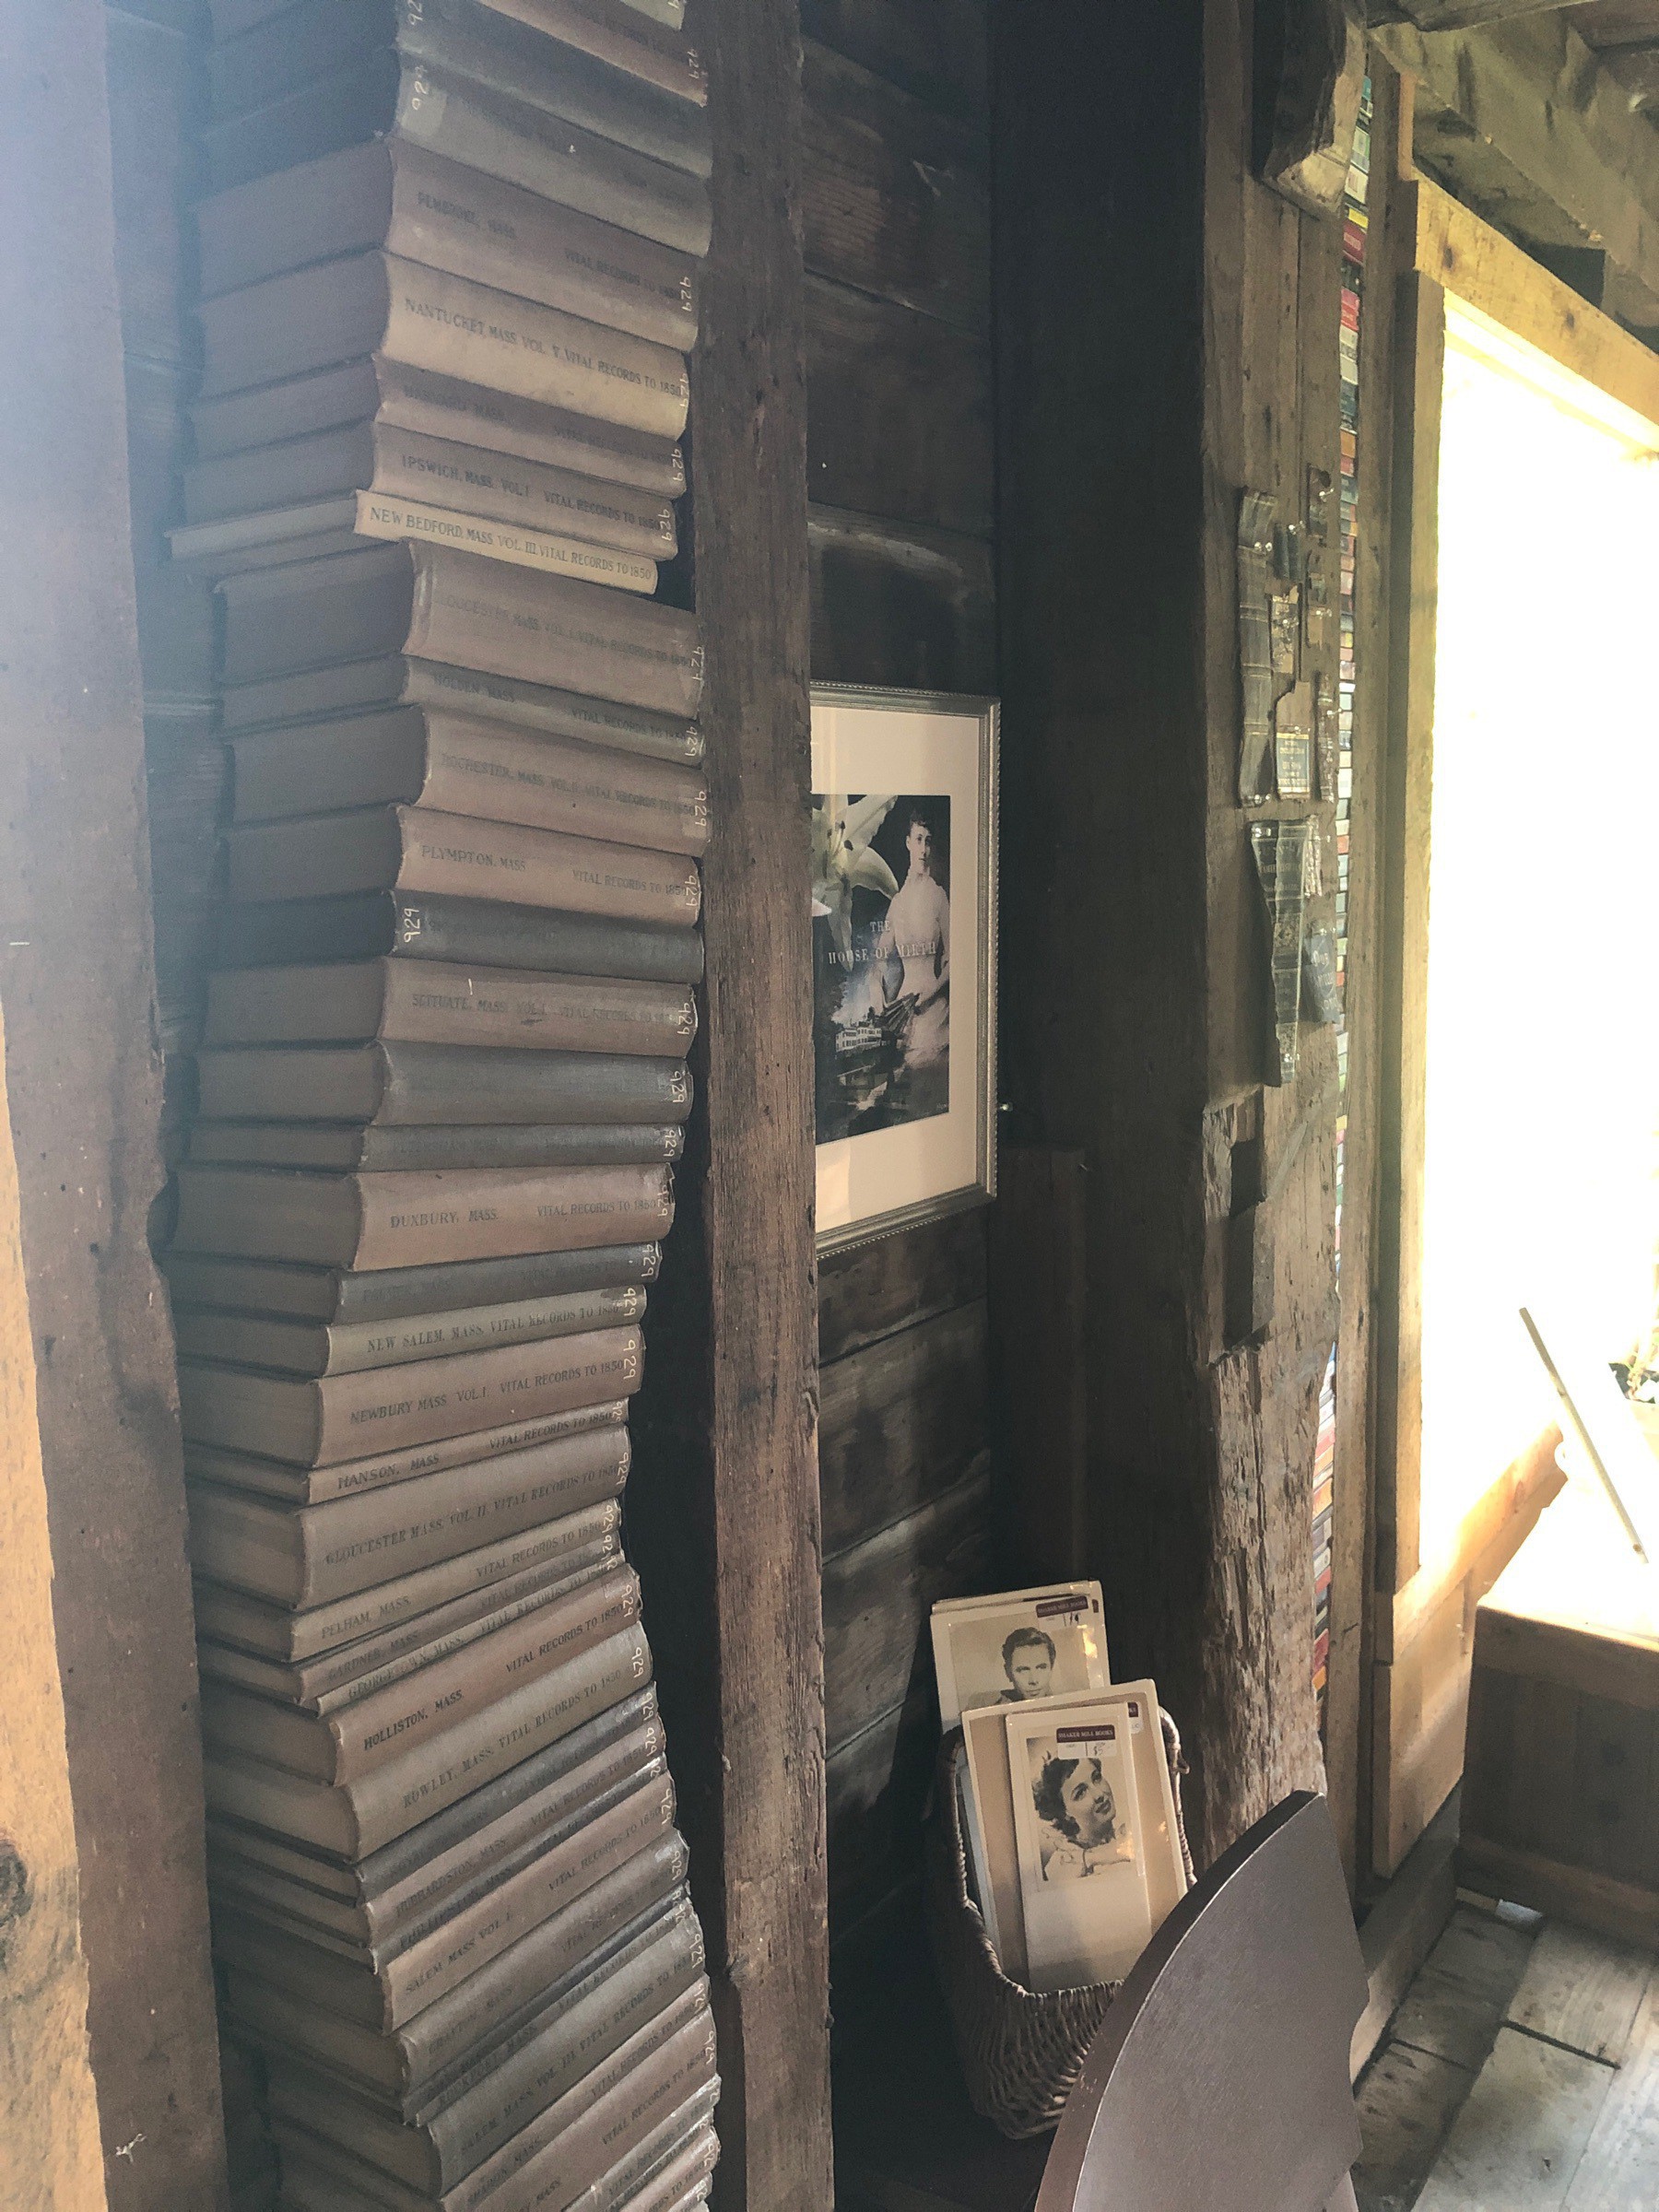 A tall stack of old books in a barn.